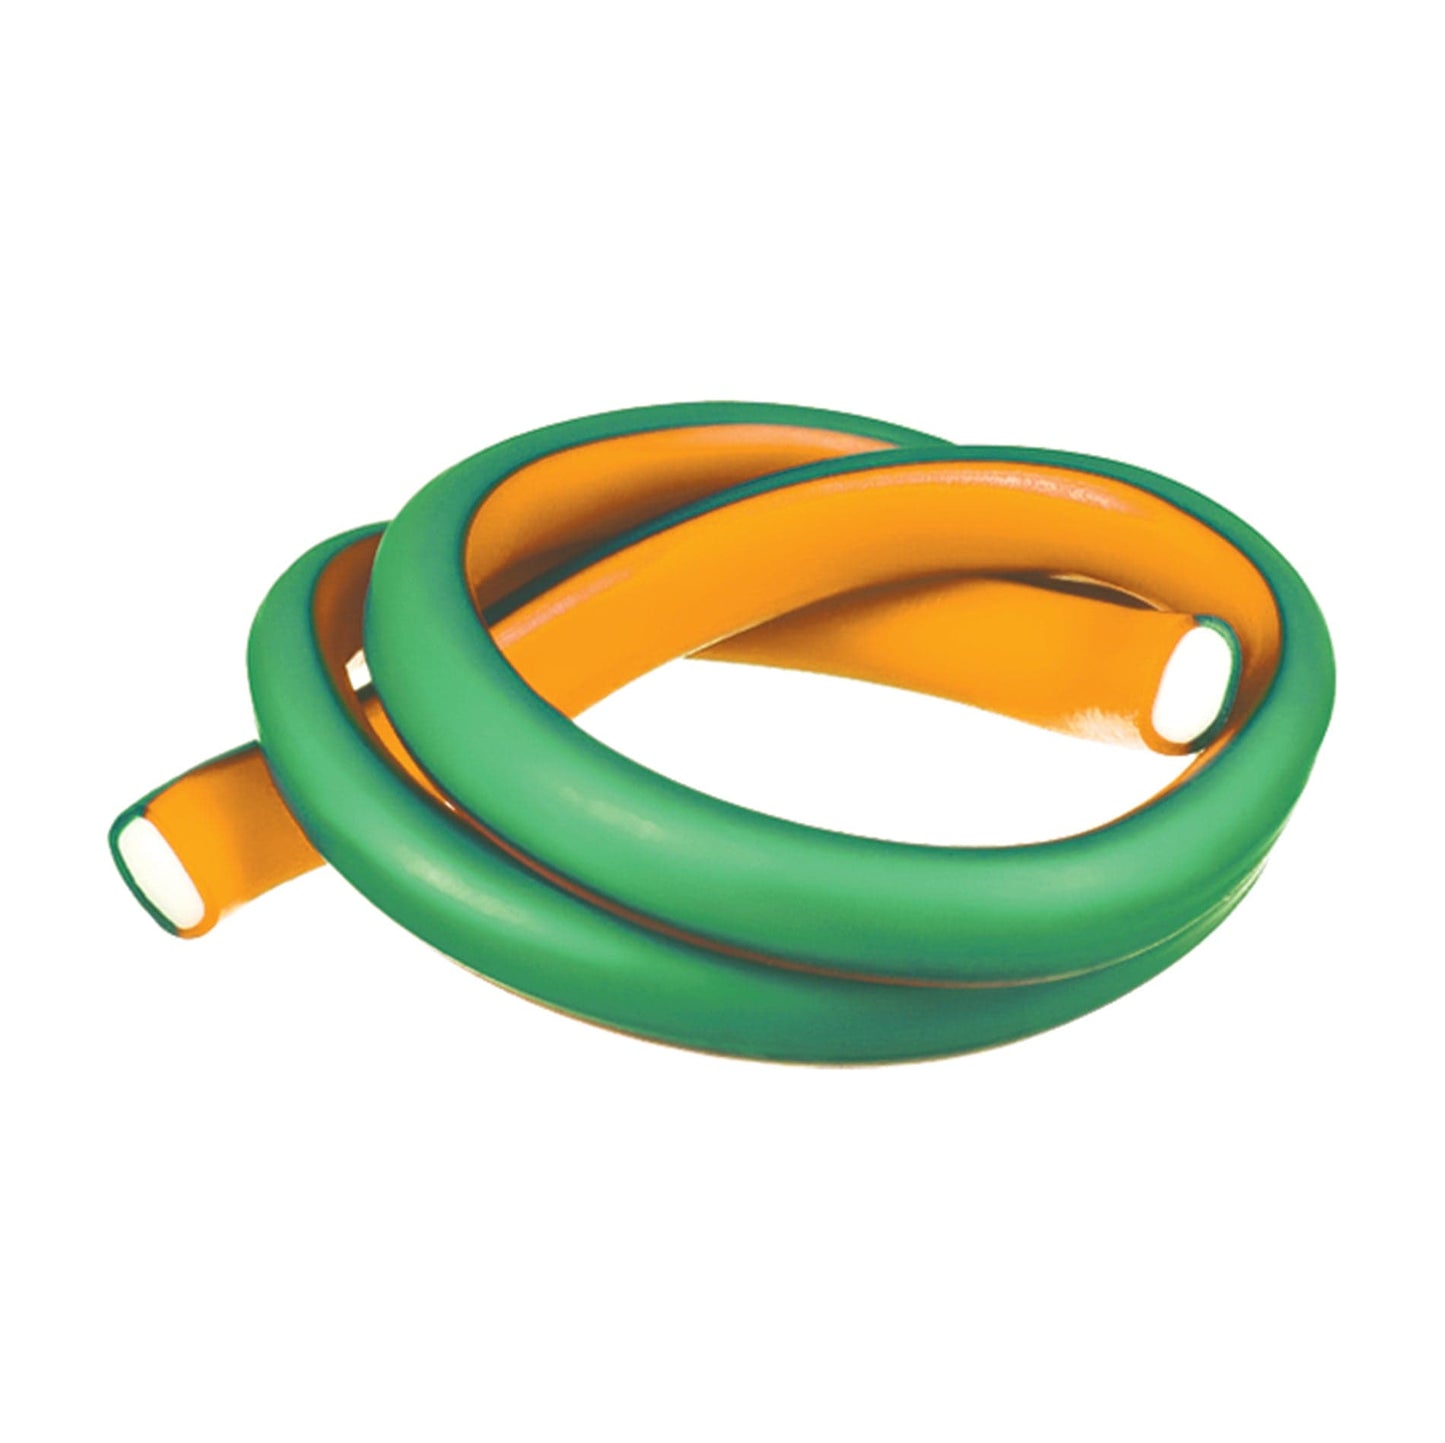 Novelty Concessions Gummy Rope ORANGE LIME / 1 Pack (30 pieces) Meeega Cables European Chewy Rope Candy - Box of 30 individually wrapped Meeega Cables, each over 2-feet long cups with lids and straws